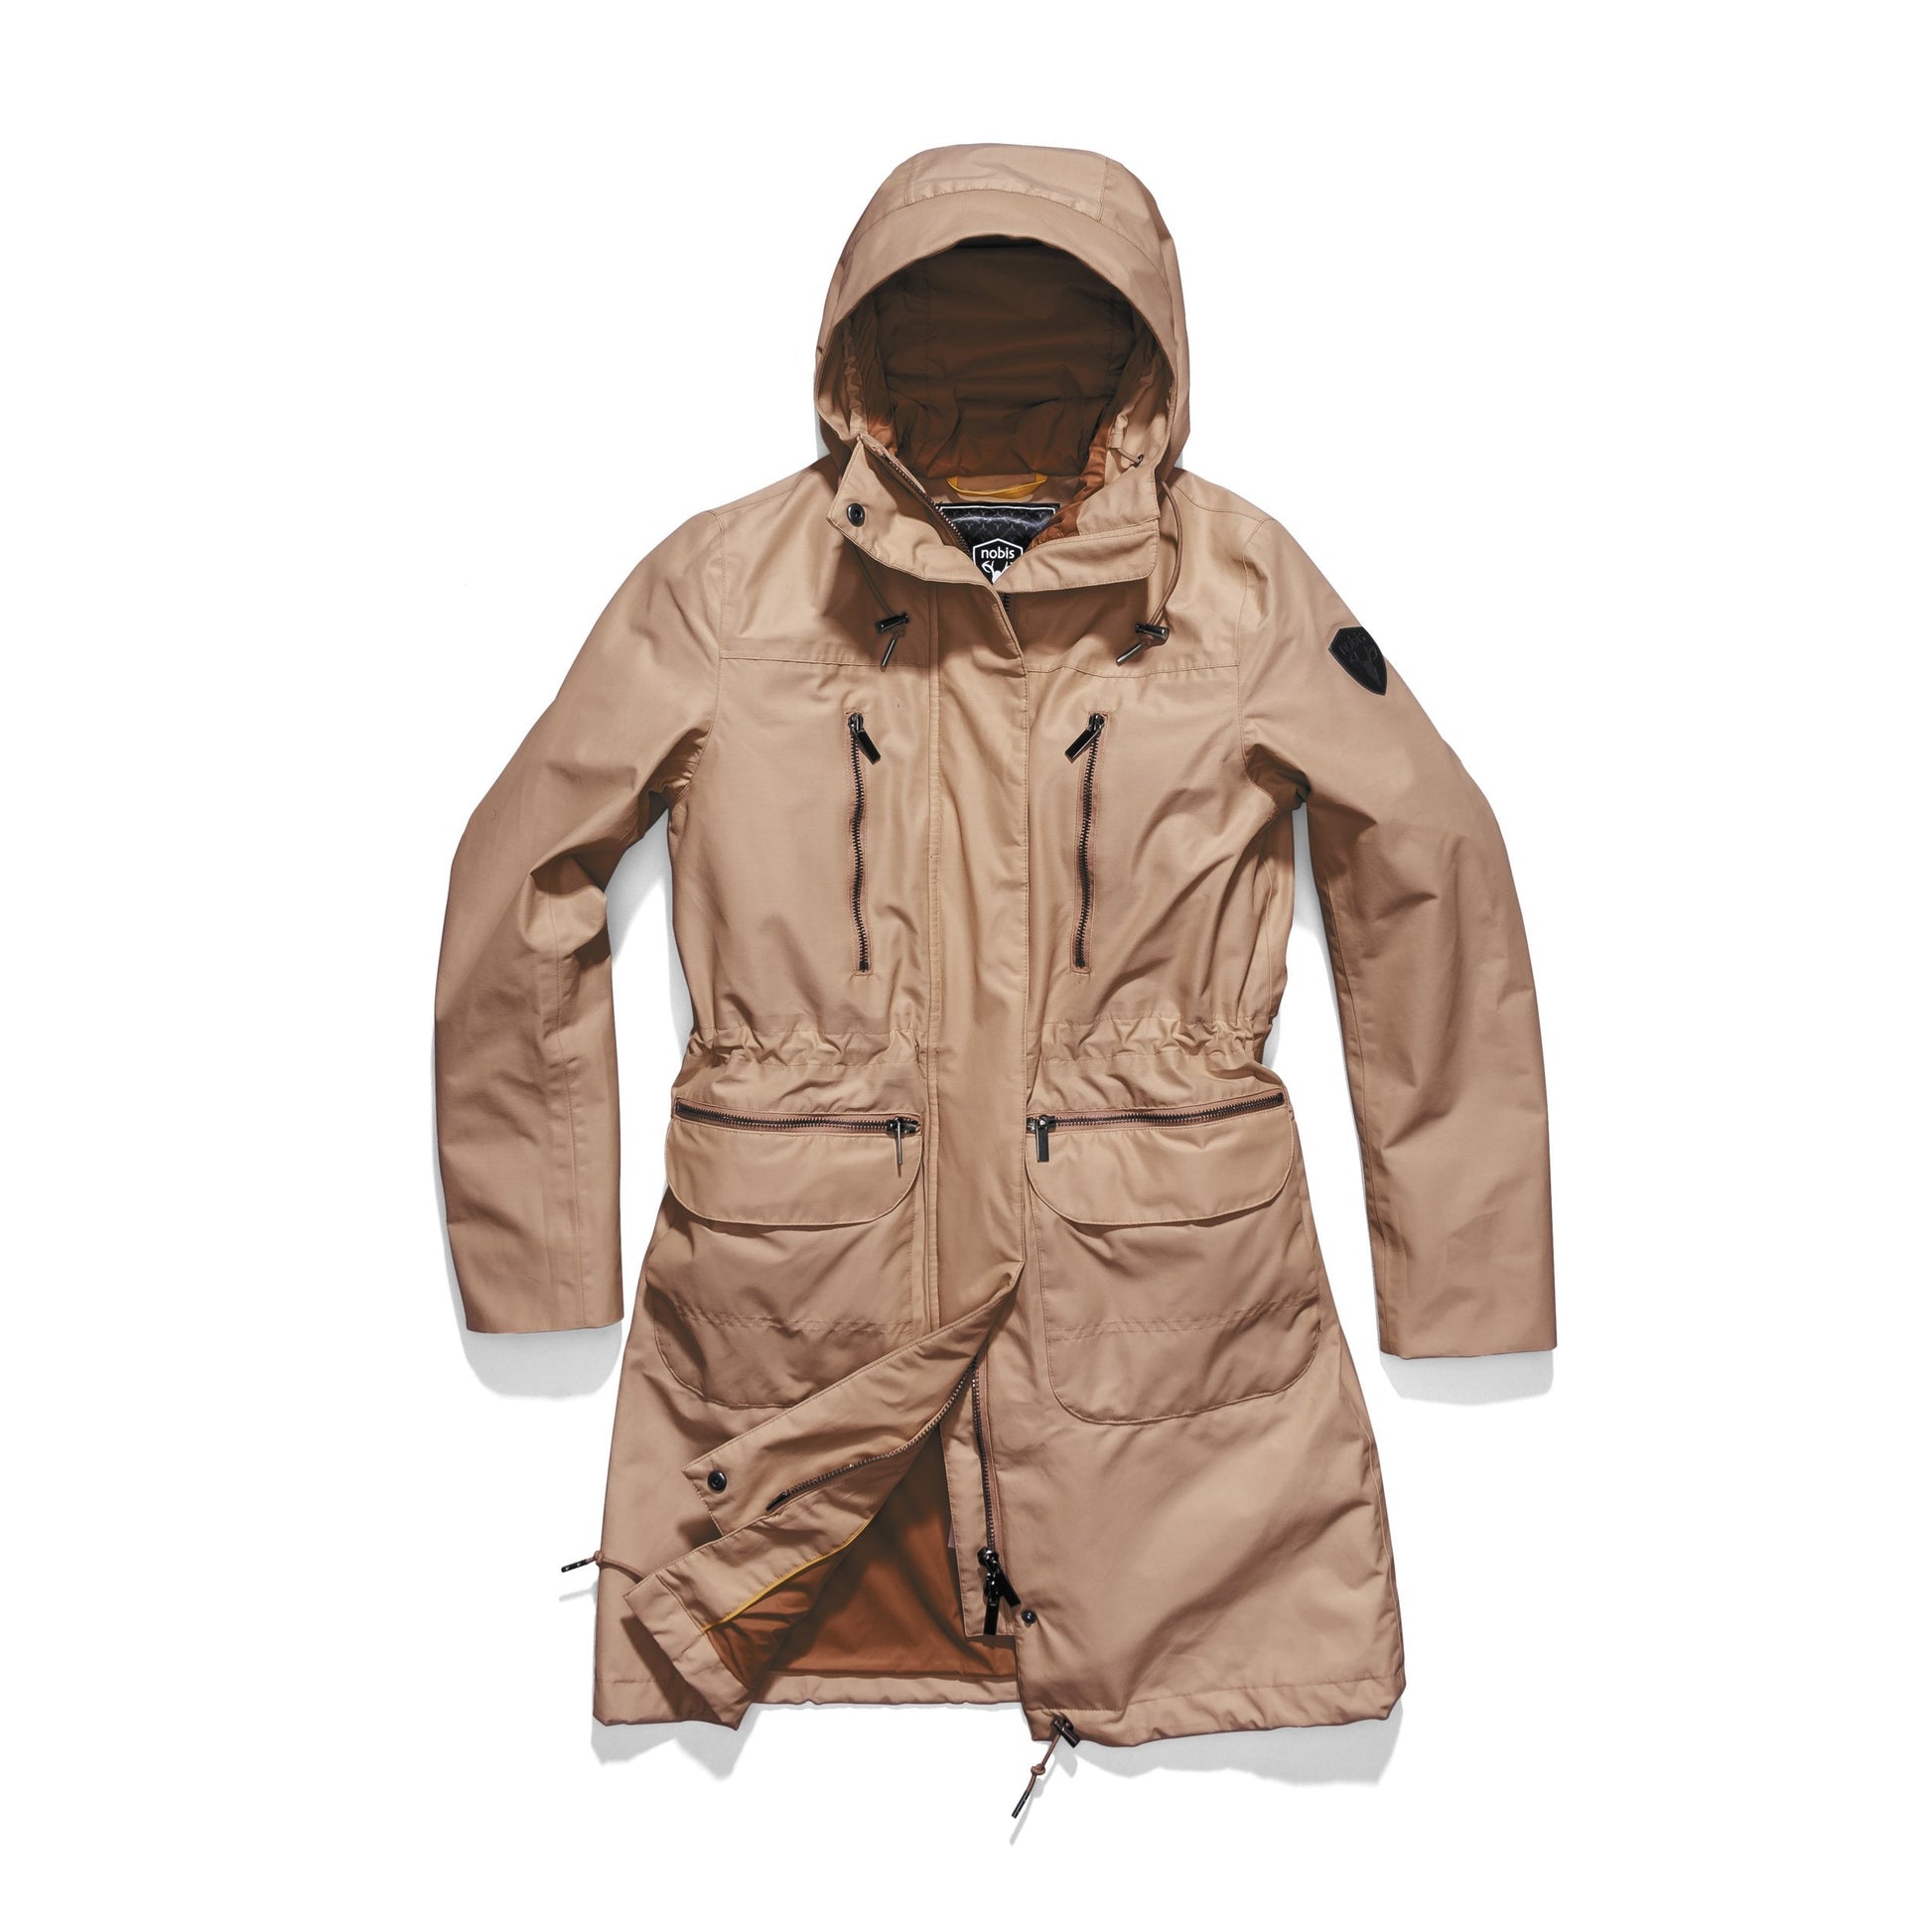 Women's knee length anorak with four front pockets and adjustable cord waist in Fawn